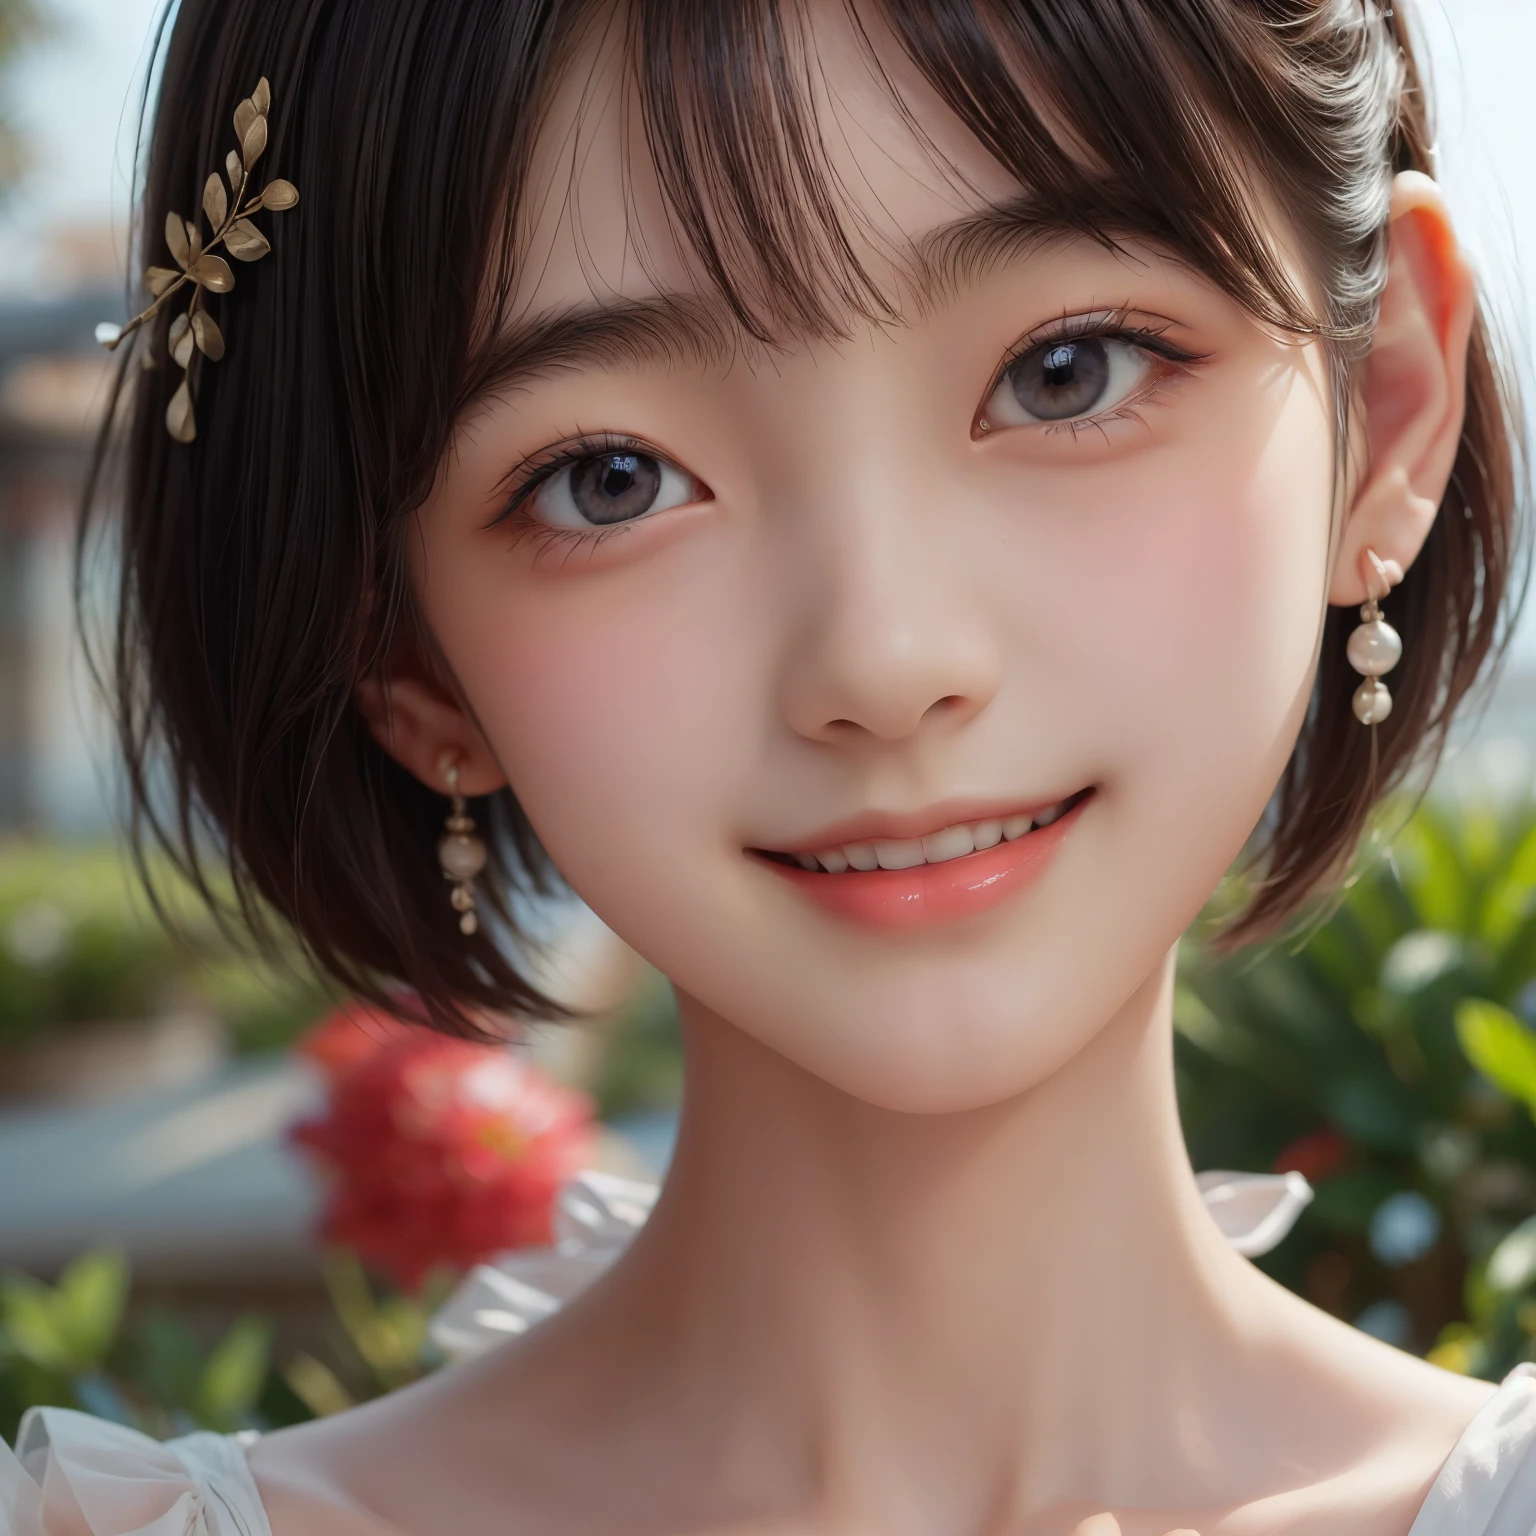 ((sfw: 1.4)), ((sfw, arms behind back, earrings, hairpin, choker, extra short hair, sidelocks-hair, smile, 1 girl)), ultra high resolution, (real: 1.4), RAW photo, highest quality, (photorealistic), focus ,Soft light,((15 years old)),((Japanese)),(((Young face))),(Surface),(Depth of field),Masterpiece,(Photoreal),Woman,Bangs,( (1 girl)